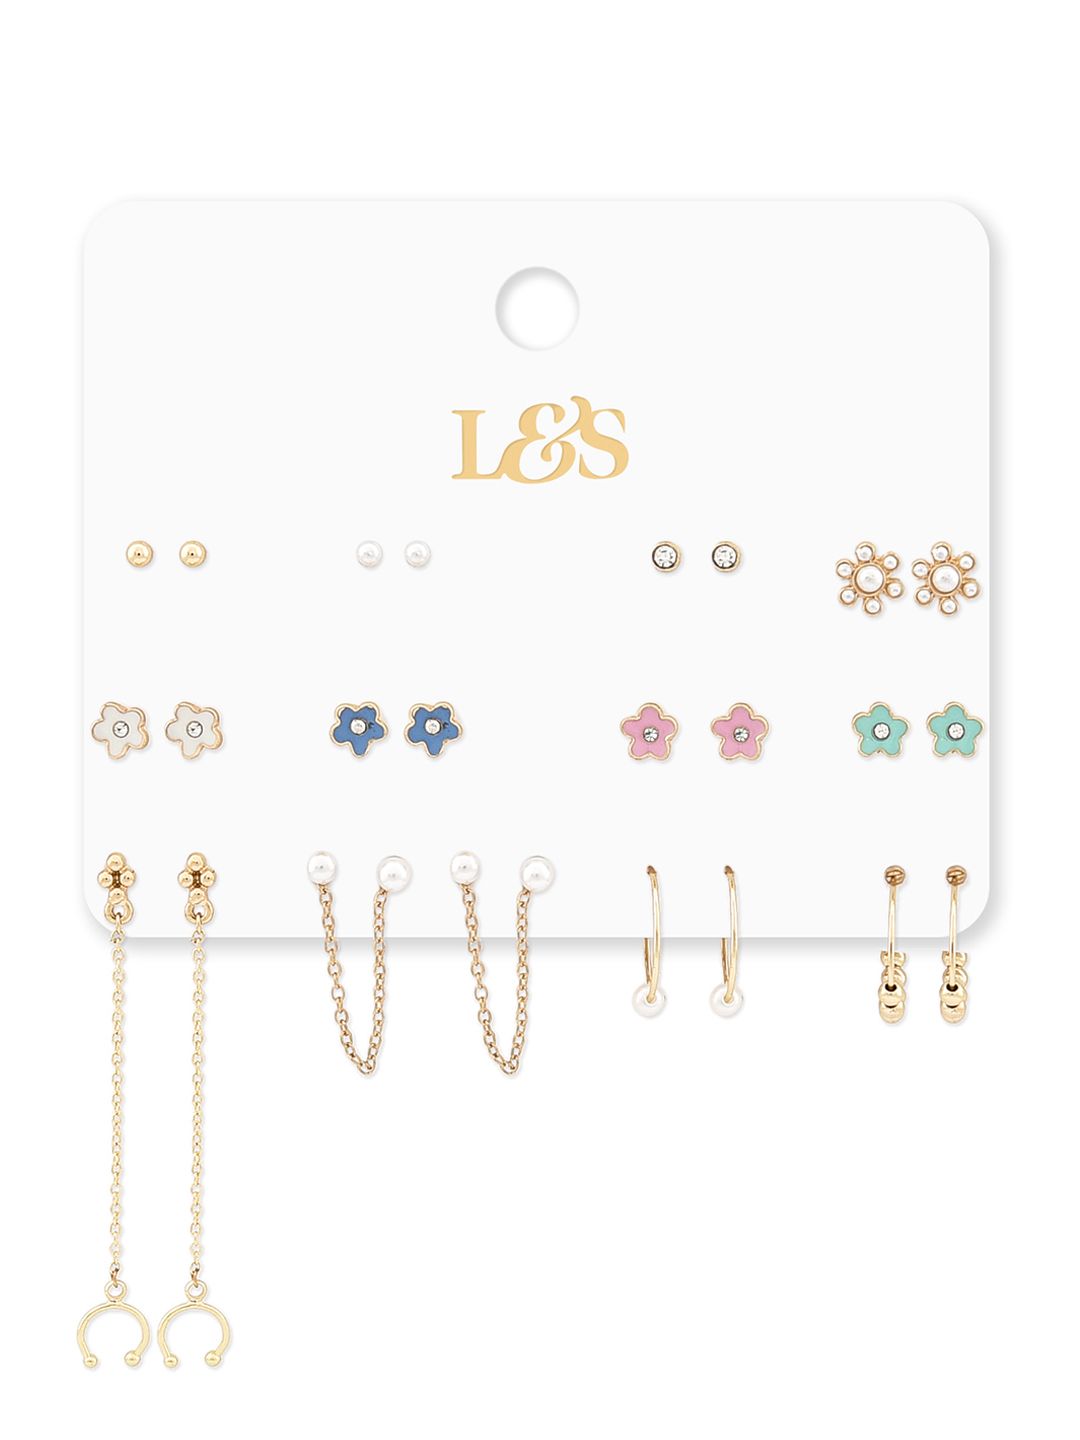 Lilly & sparkle Pack Of 12 Gold-Toned Contemporary Studs Earrings Price in India